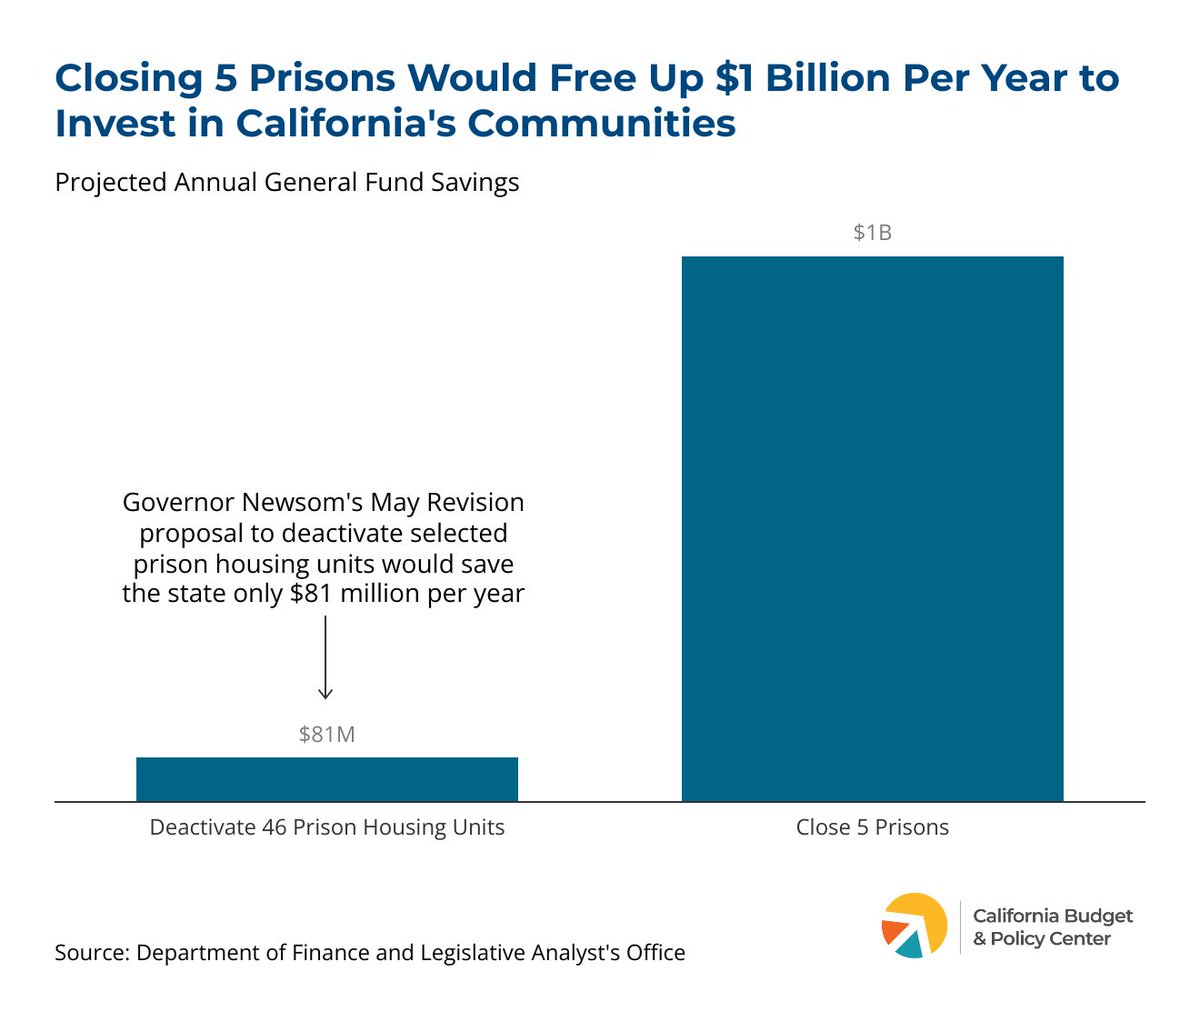 Closing prisons is the only way to substantially reduce state corrections spending. CA can safely close up to 5 prisons, which would save around $1 billion per year to invest in people and essential programs that can end the root causes of harm and crime. #CABudget #CALeg